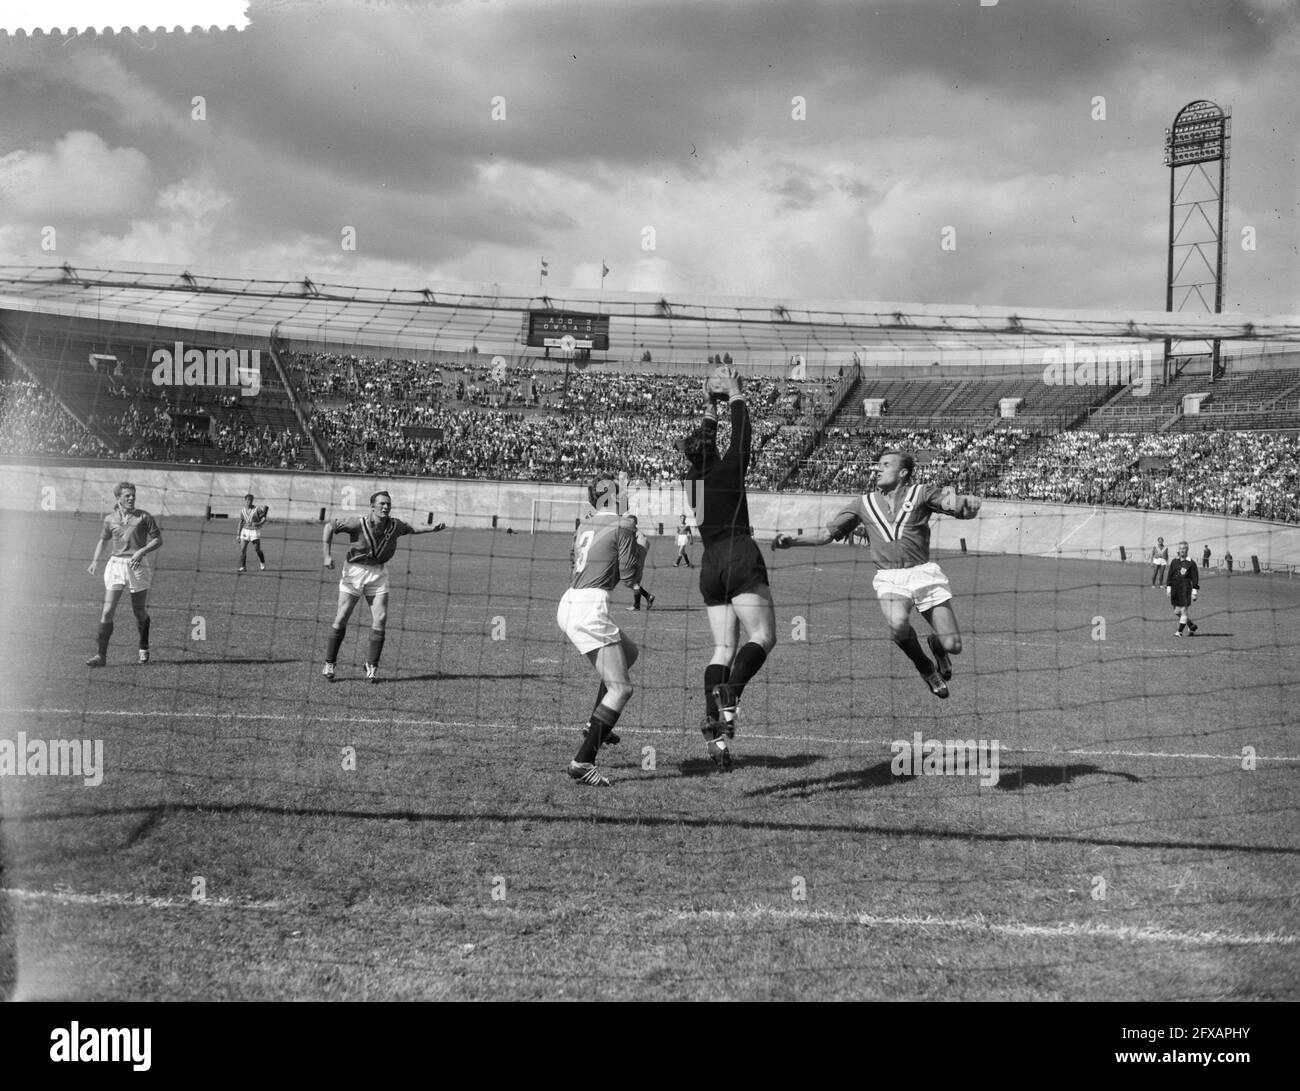 DWS against ADO 2-4, goalkeeper Niezen intercepts an attack Schenkel,  August 30, 1959, The Netherlands, 20th century press agency photo, news to  remember, documentary, historic photography 1945-1990, visual stories,  human history of